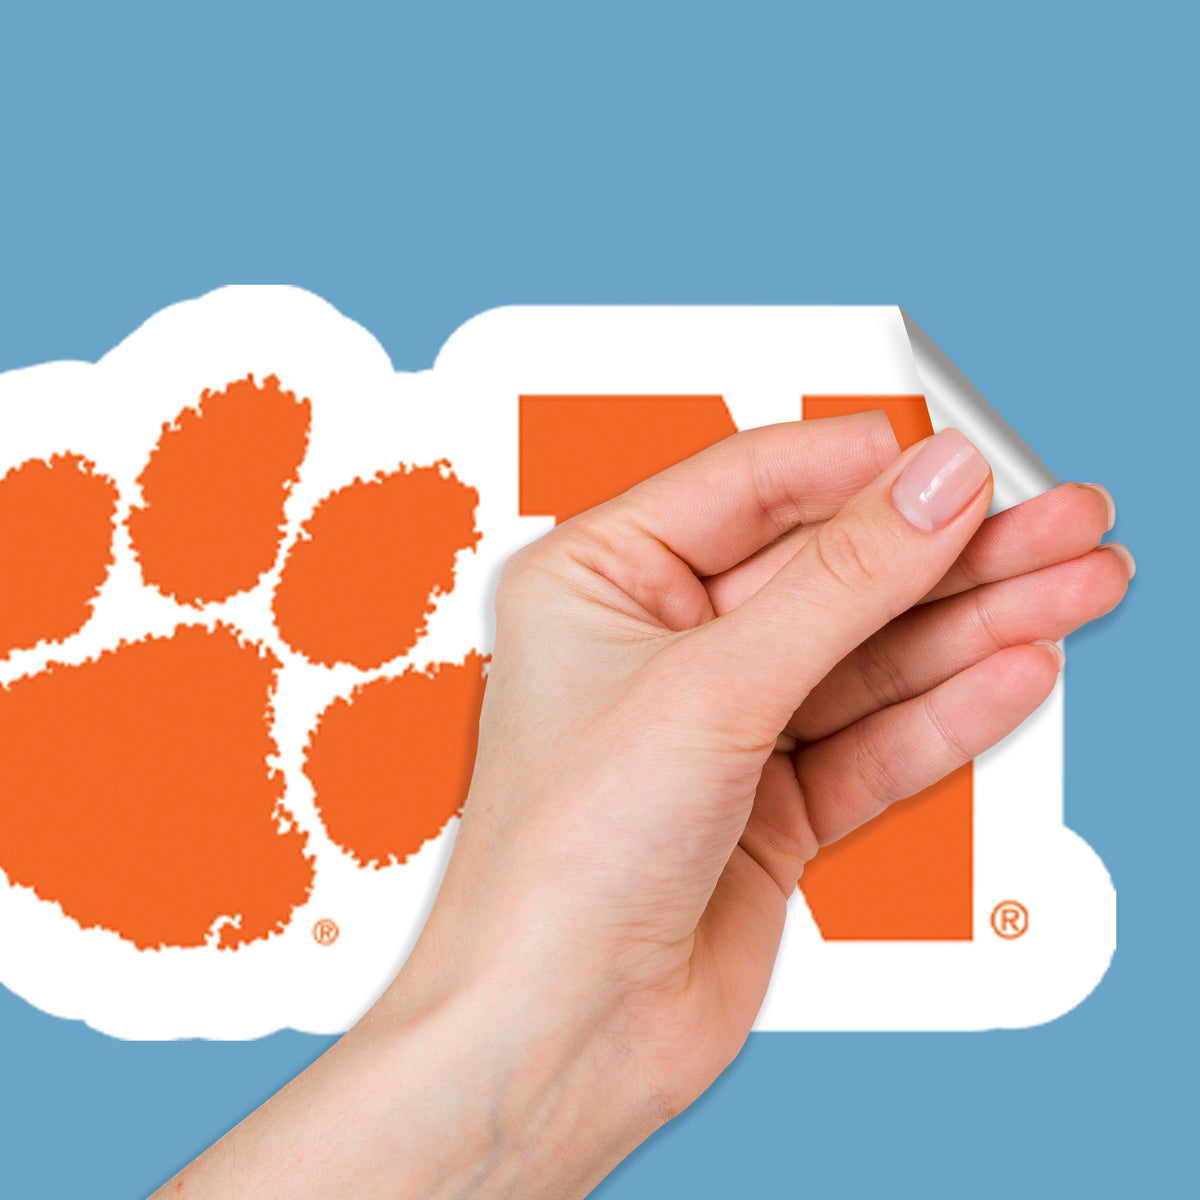 Clemson Tigers:    Foam Finger        - Officially Licensed NCAA Removable     Adhesive Decal